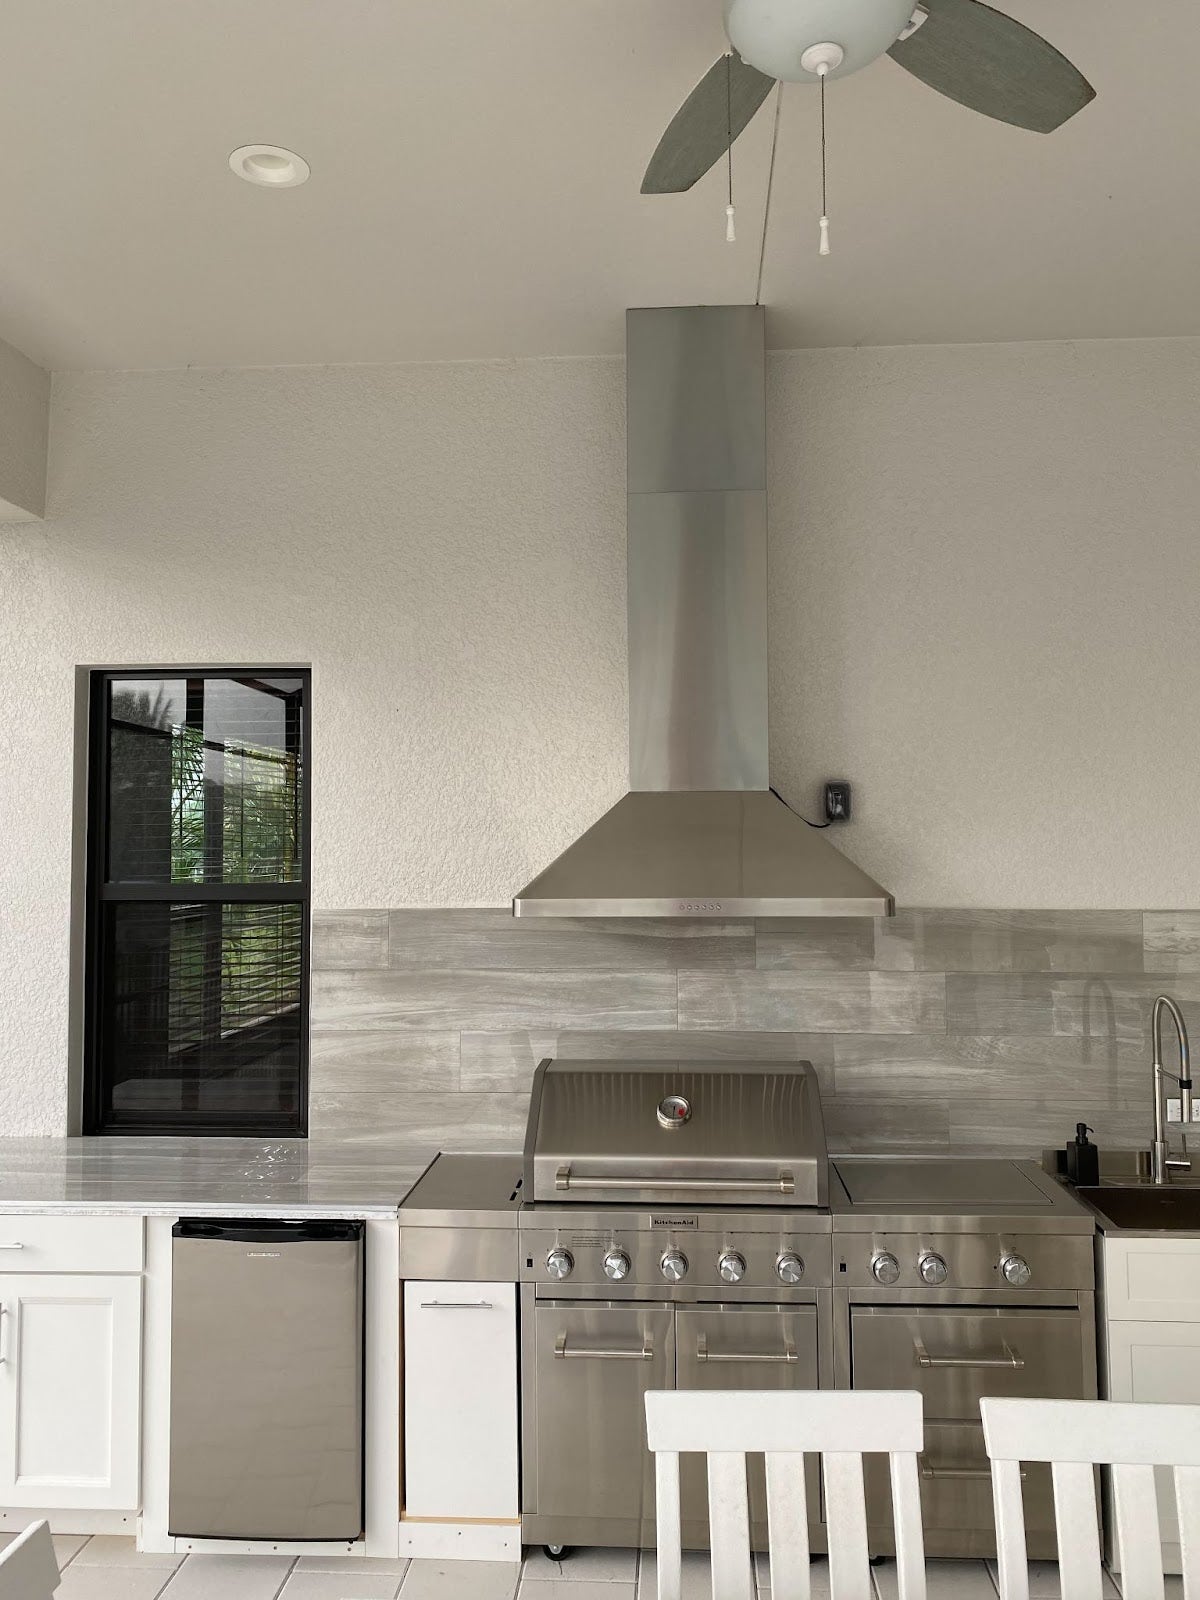 Minimalist covered patio kitchen with a stainless steel Proline range hood, white cabinetry, and a contemporary dining area - prolinerangehoods.com